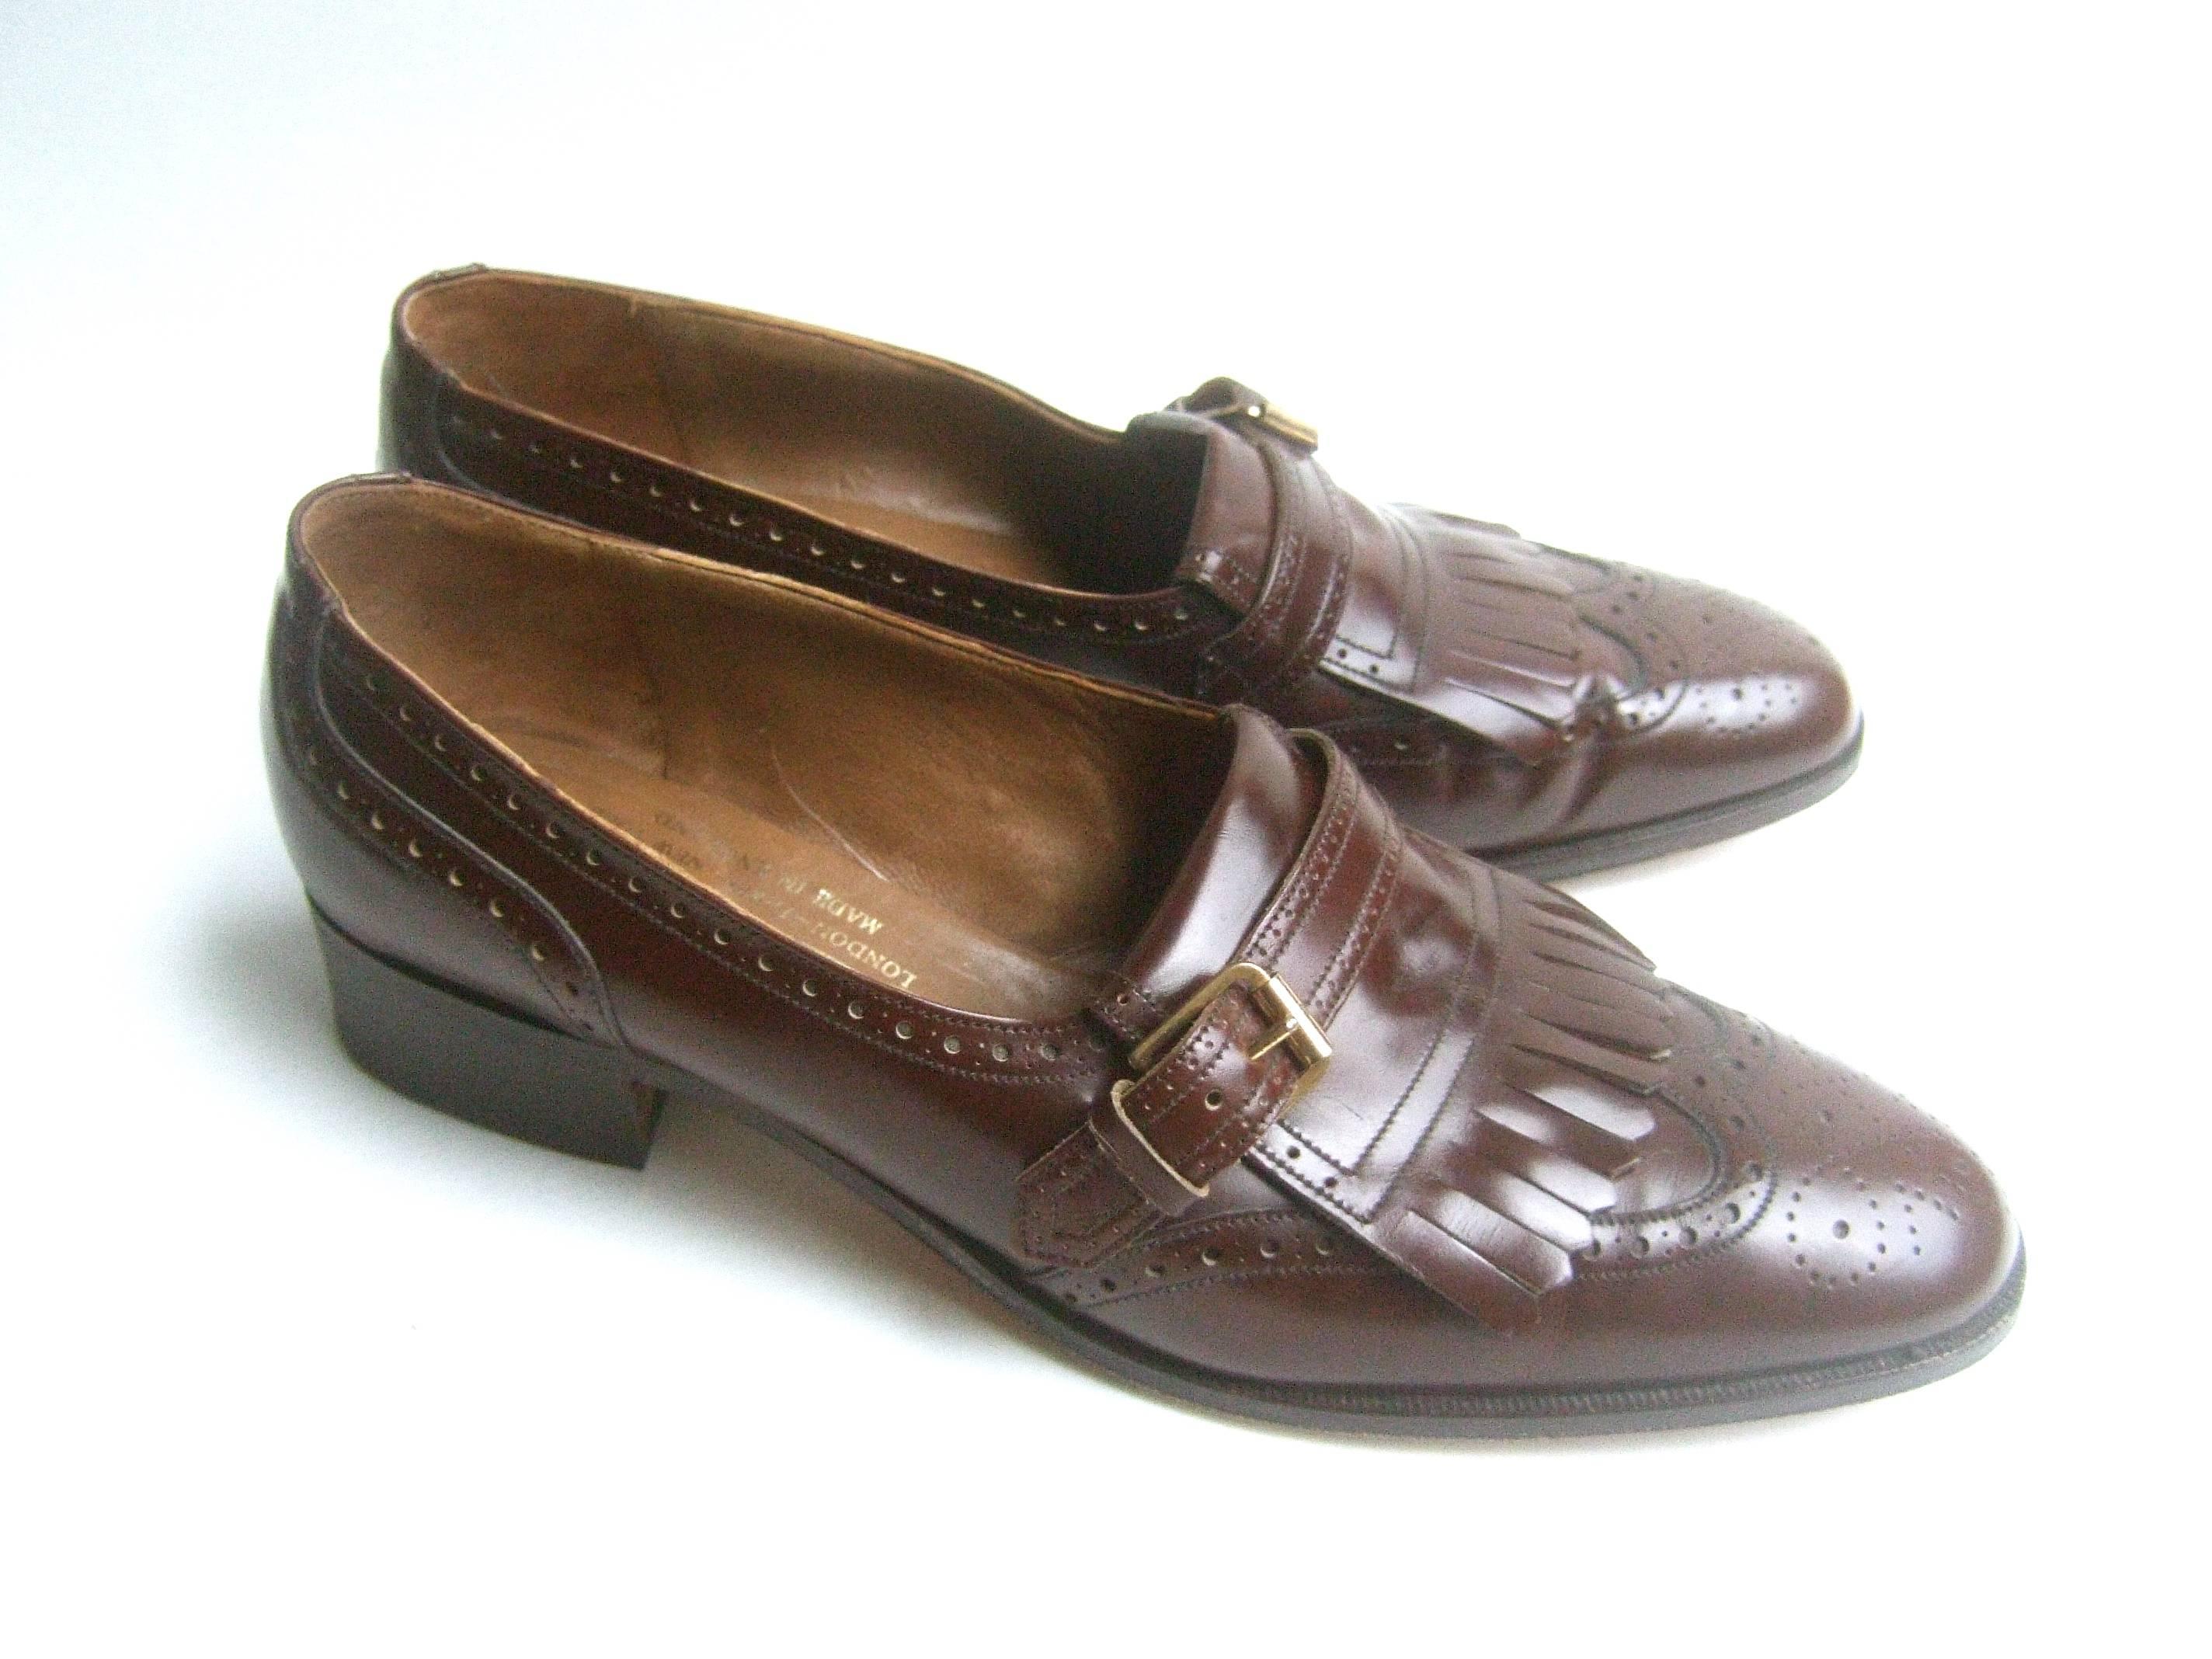 Church's London classic men's brown leather brogues
The stylish brown loafers are designed with a gilt buckle 
and perforated detail on the front and sides 

A timeless design that is eternally in style 
Labeled Church's London Paris New York 
Made